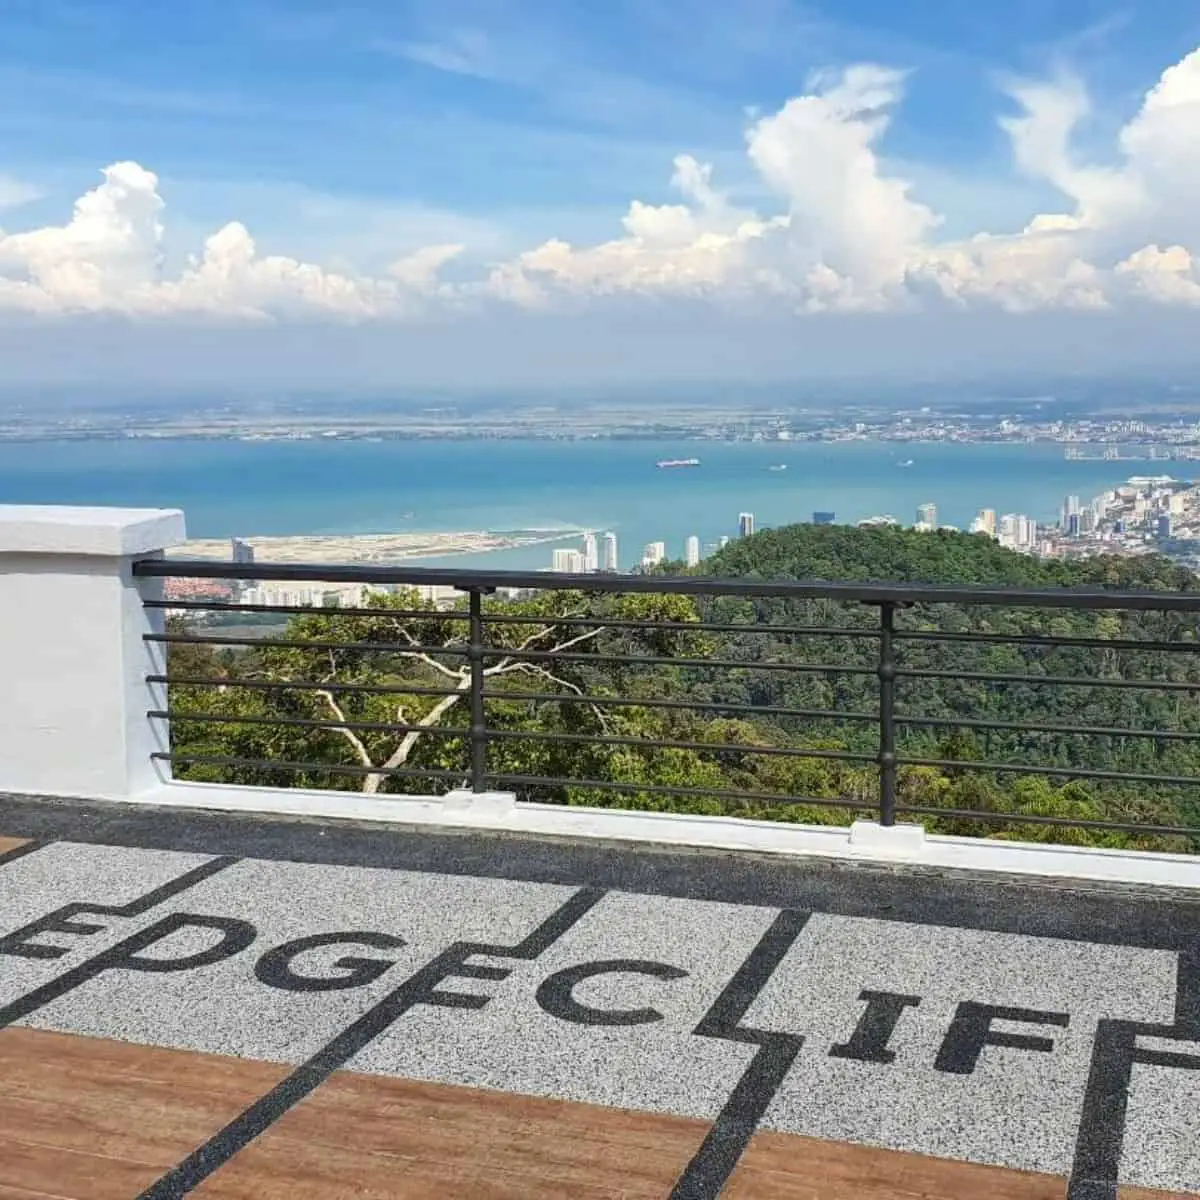 Gallery at Edgecliff in Penang Hill 